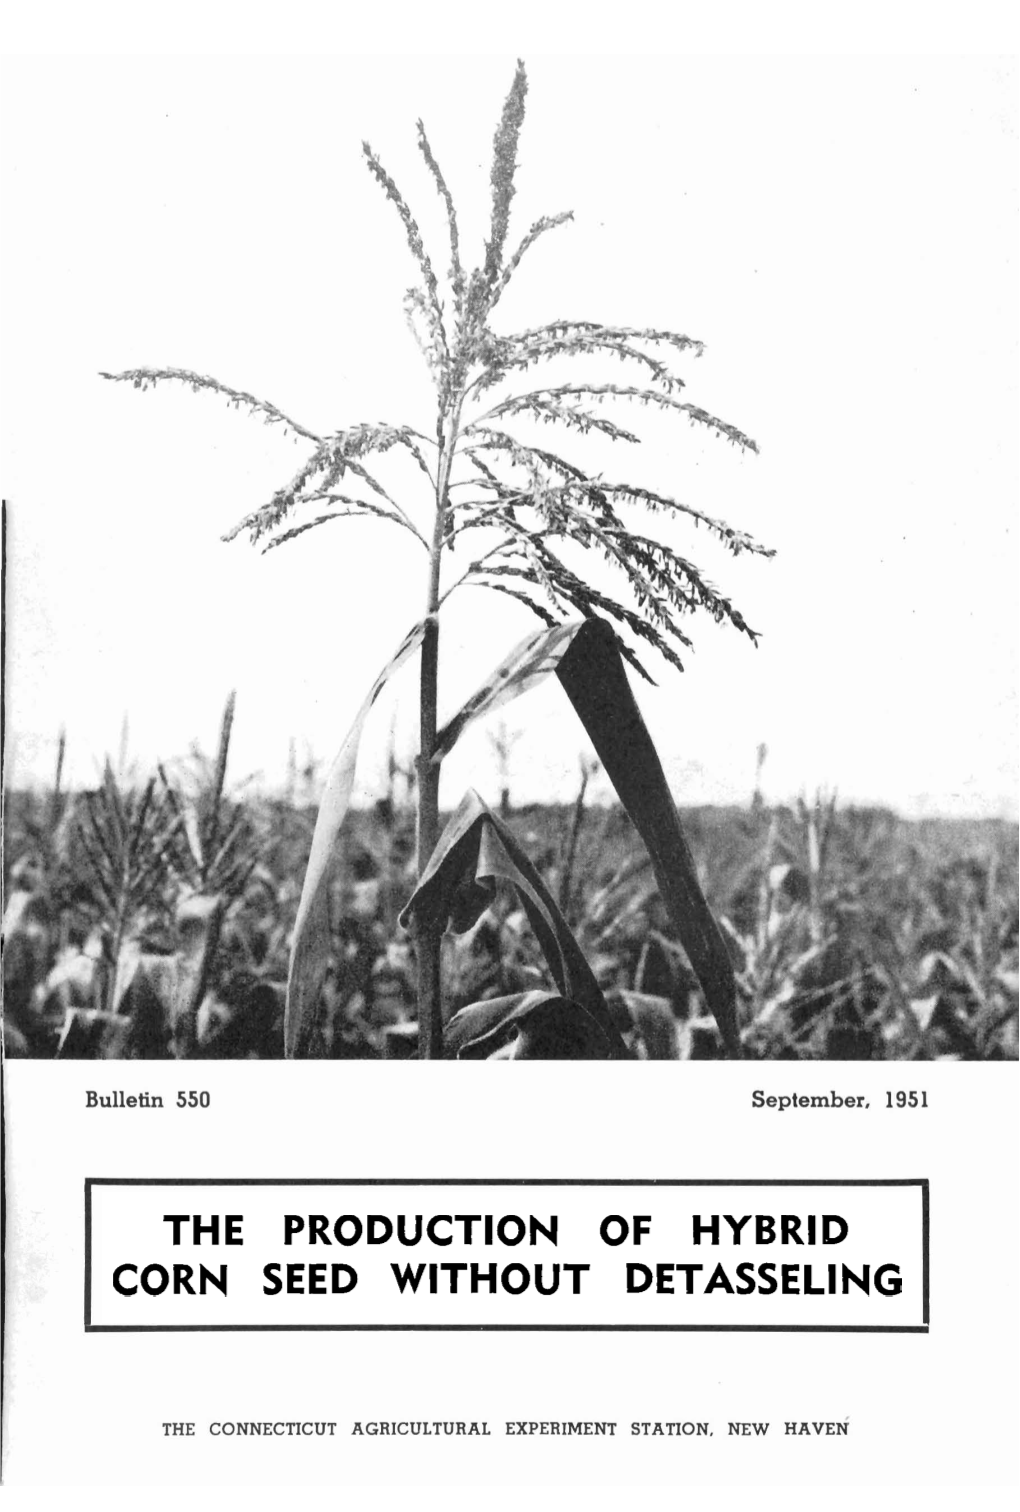 THE PRODUCTION of HYBRID CORN SEED WITHOUT DETASSELING the Cover Picture Shows Normal Tassel Shortly After Maximum Pollen Shedding